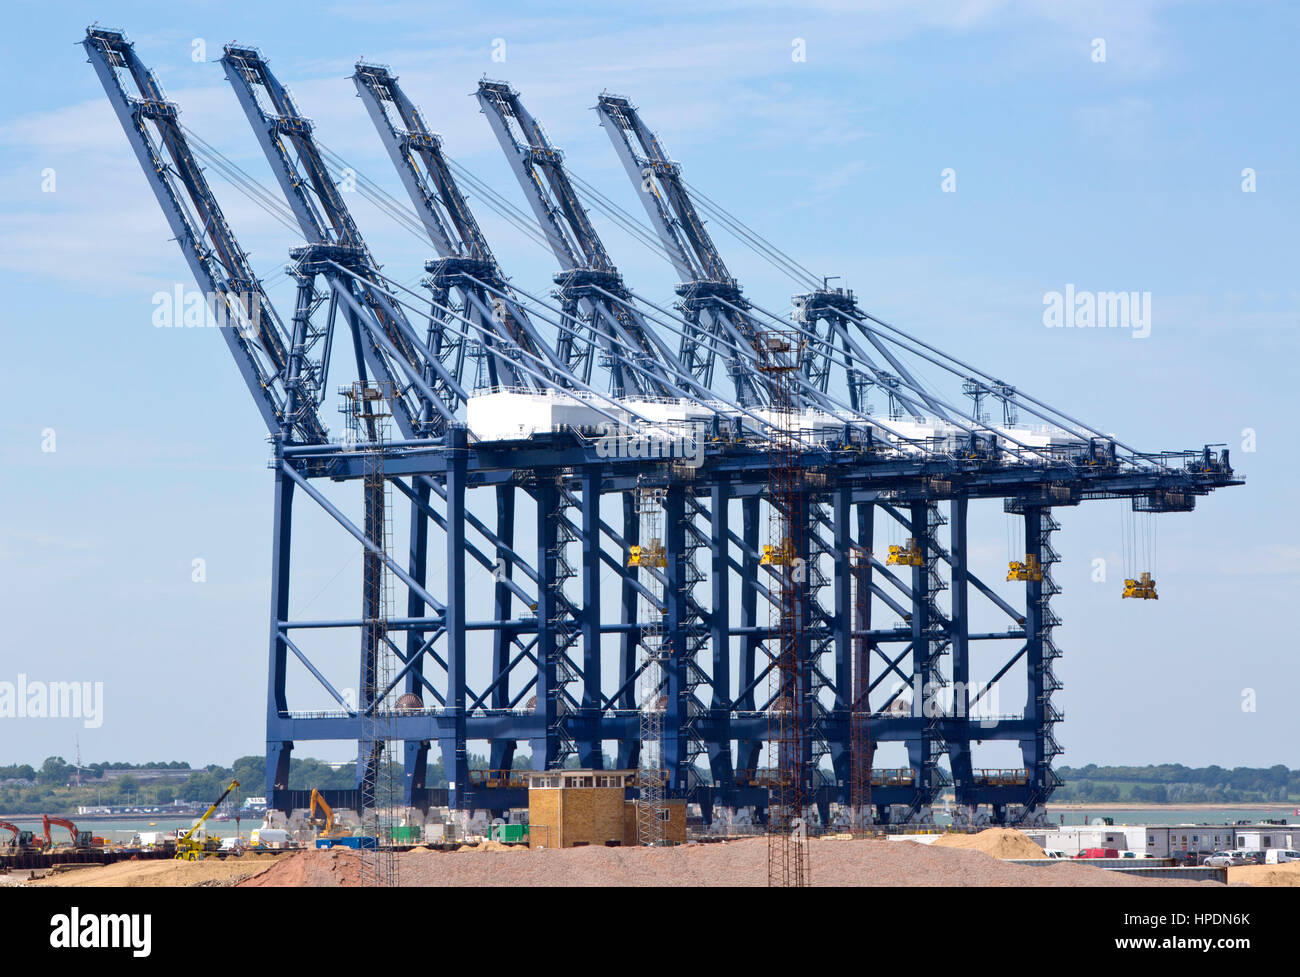 Giant cranes at the container port of Felixstowe, UK Stock Photo